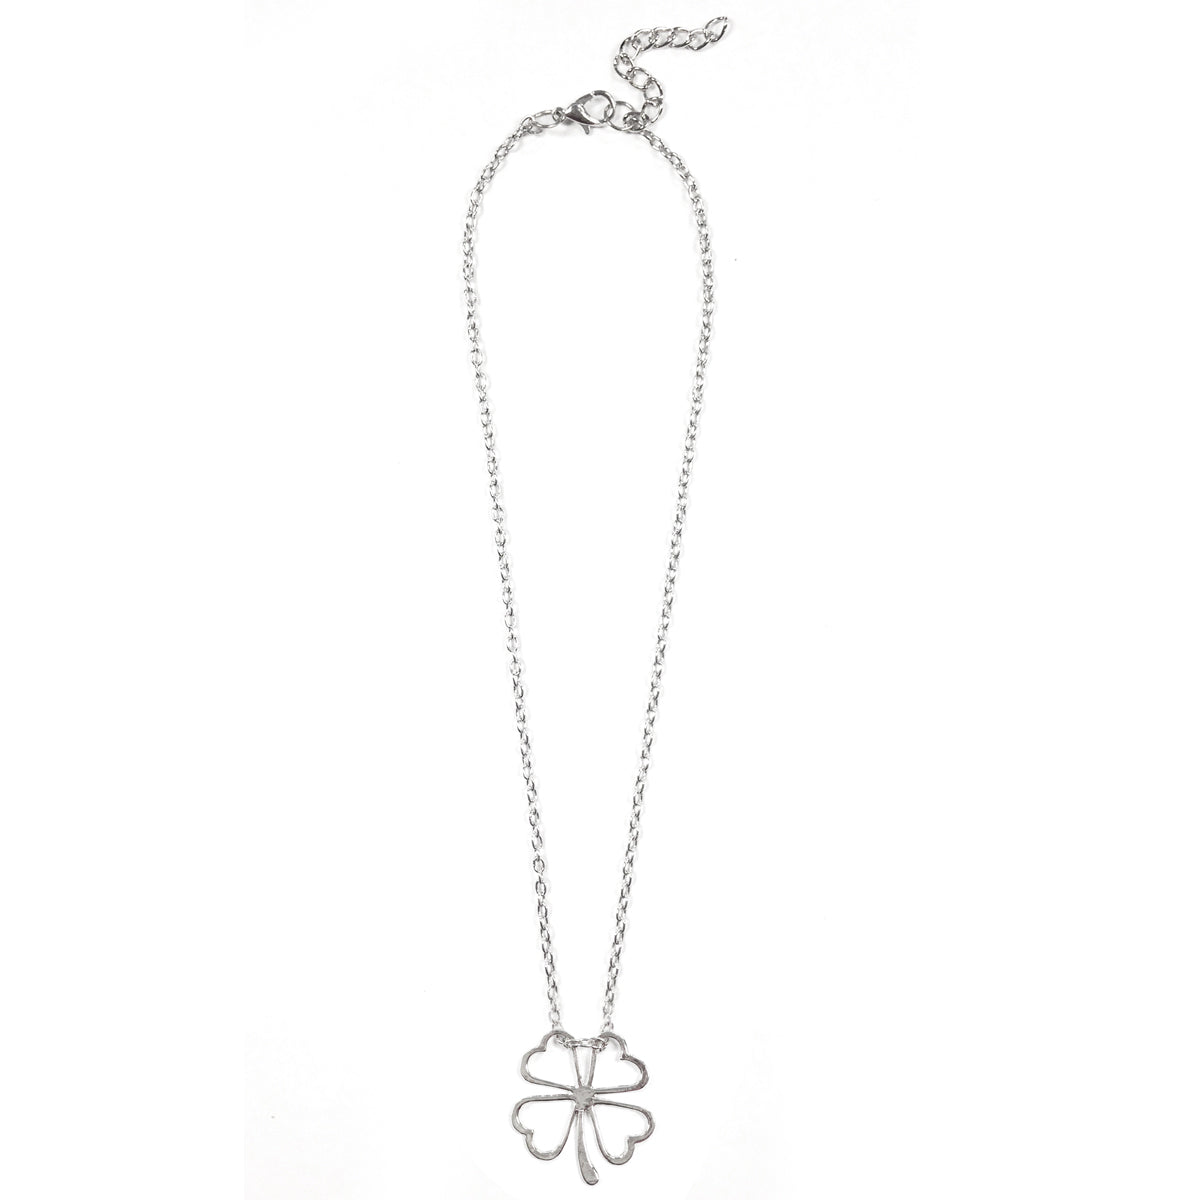 Wrapables Four Leaf Clover Flower Necklace and Earrings Set